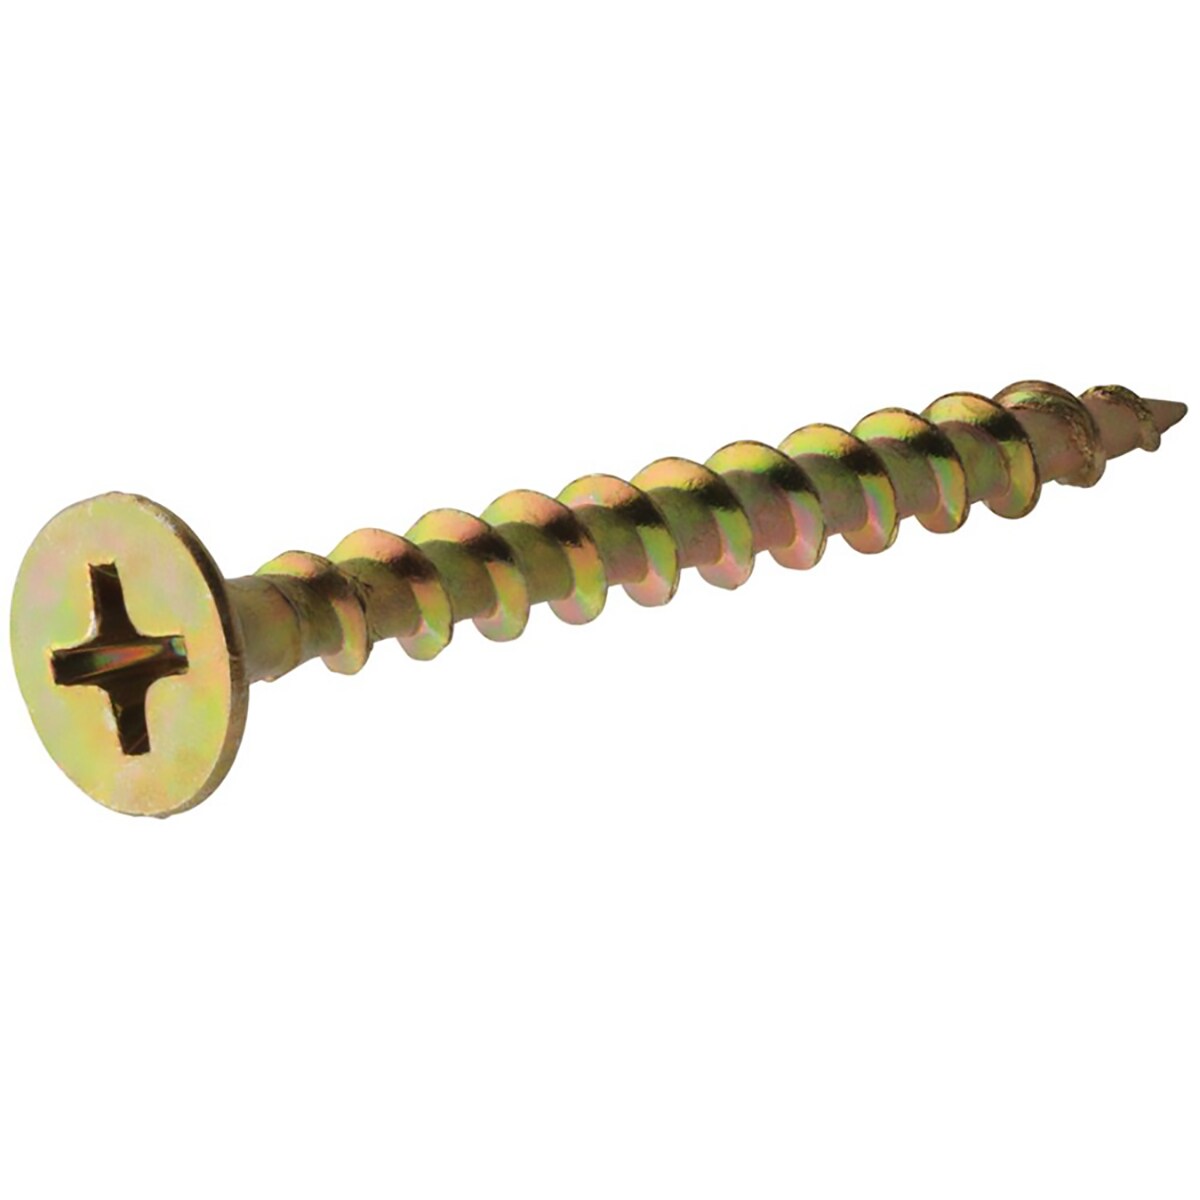 8 X 2 1/2 Inch  Pack Of 24 Pozi Twinthread Wood Screws Countersunk Zp No 